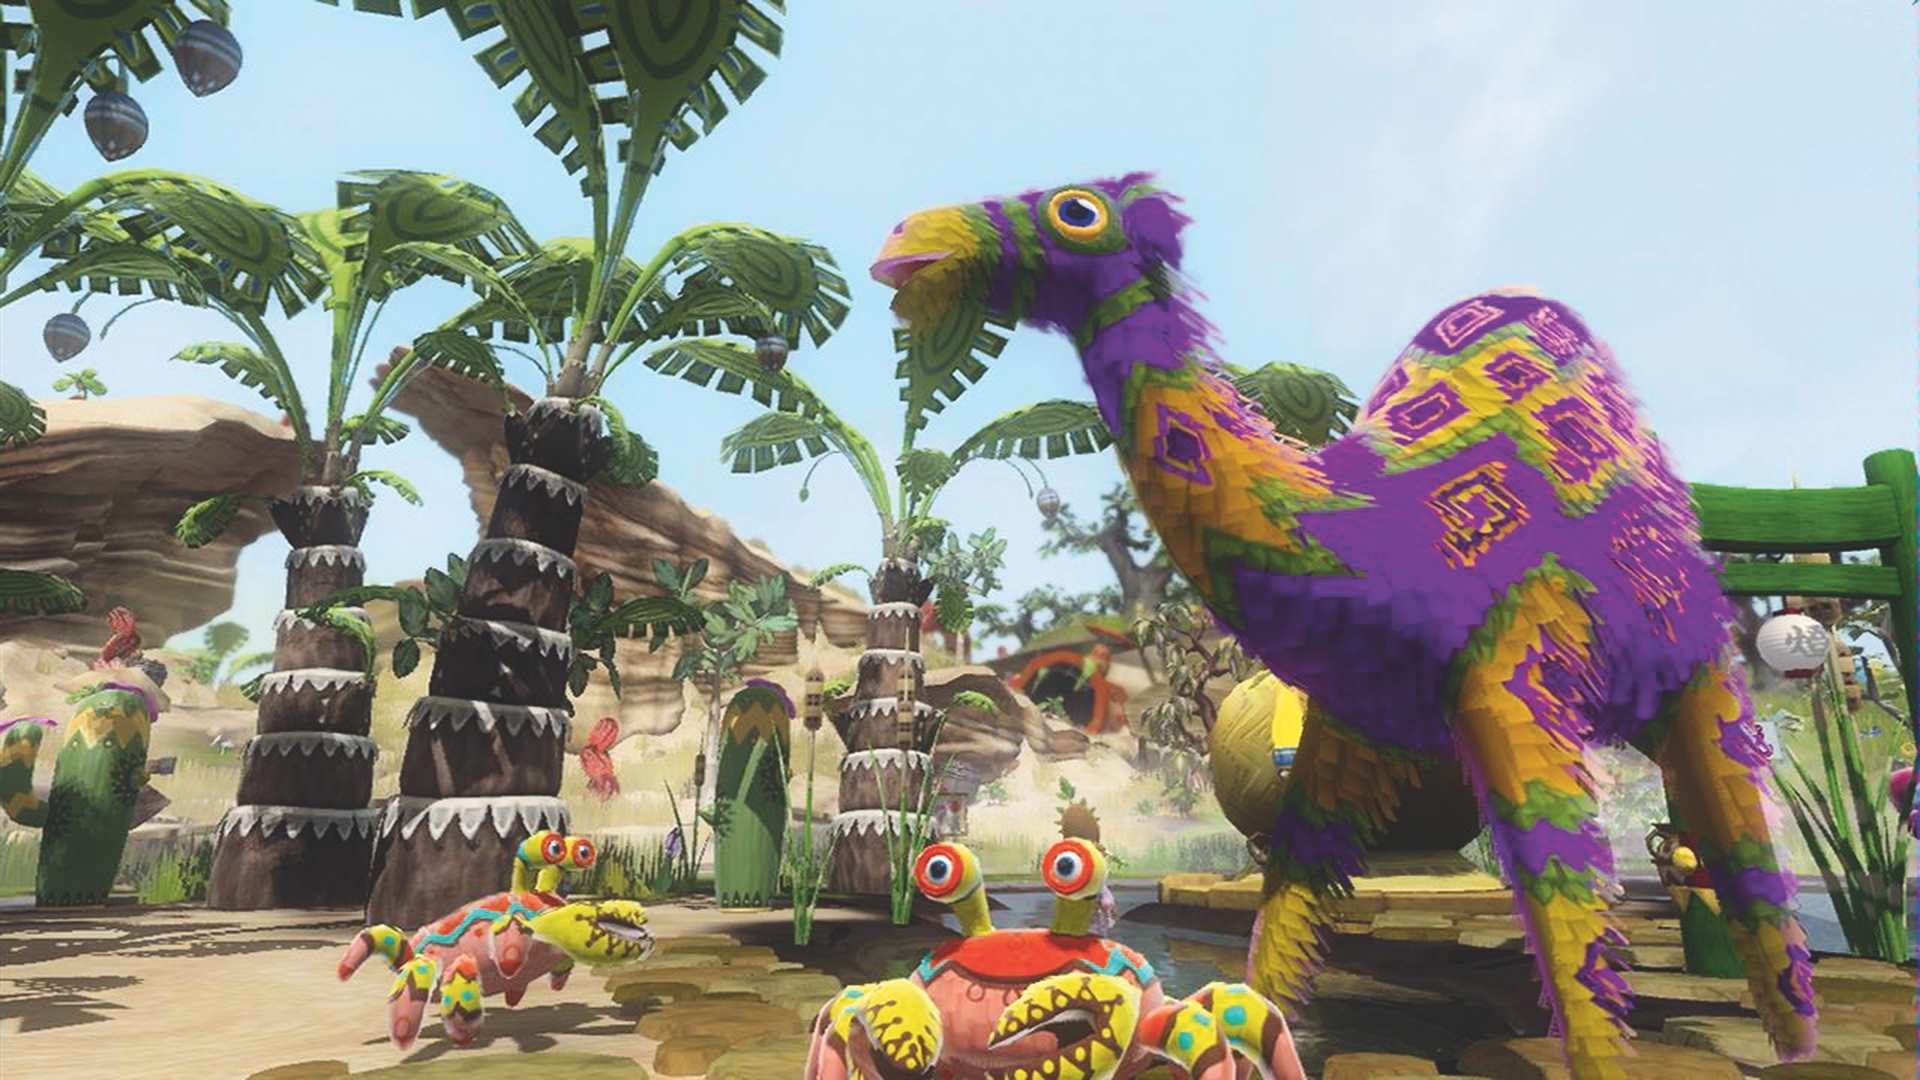 Best farm games - Viva Piñata: Trouble in Paradise. A screenshot shows a mixture of different Piñatas walking within a player's garden.